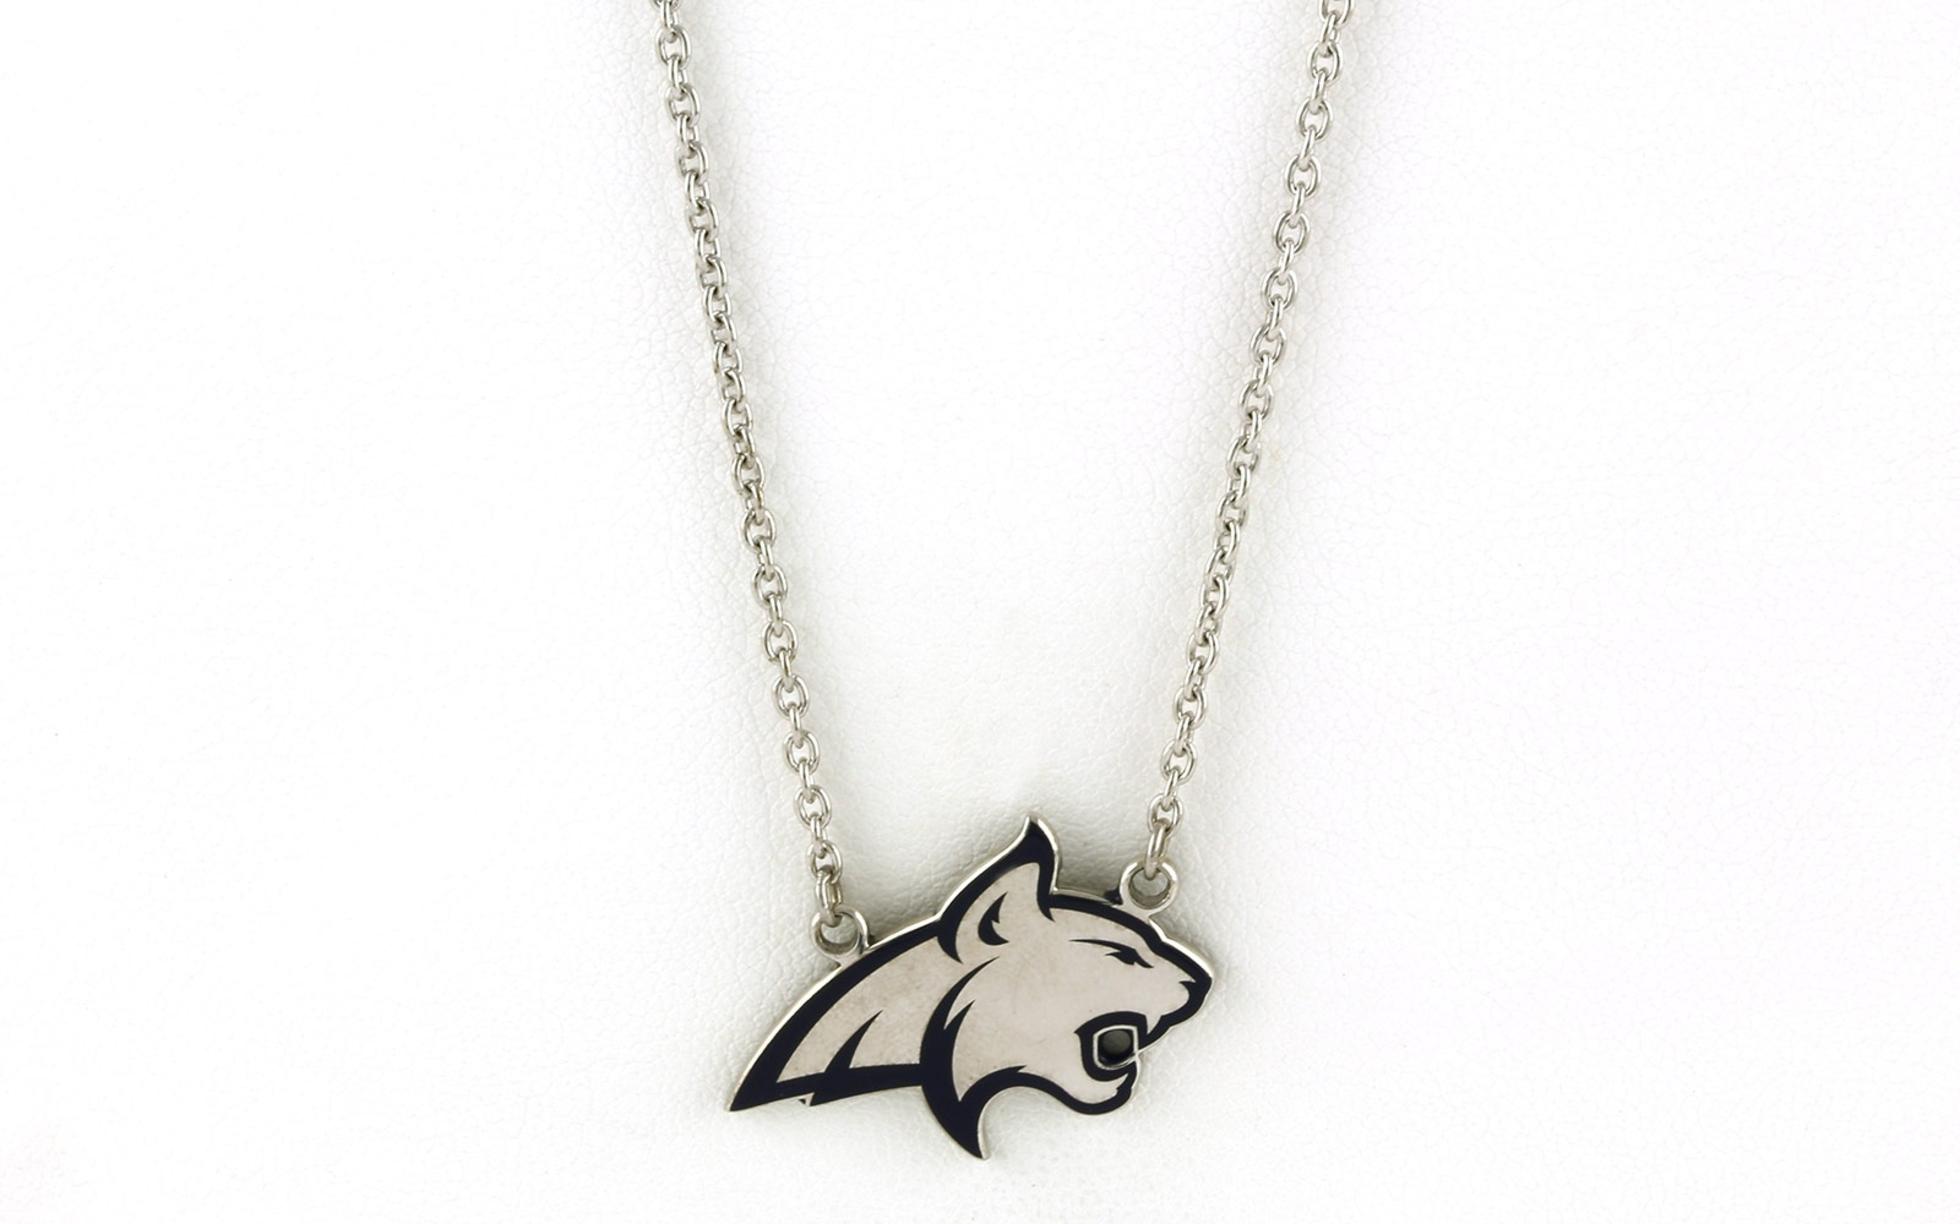 Large Official Bobcat Pendant/Charm with Navy Blue Enamel on Split Chain in Sterling Silver